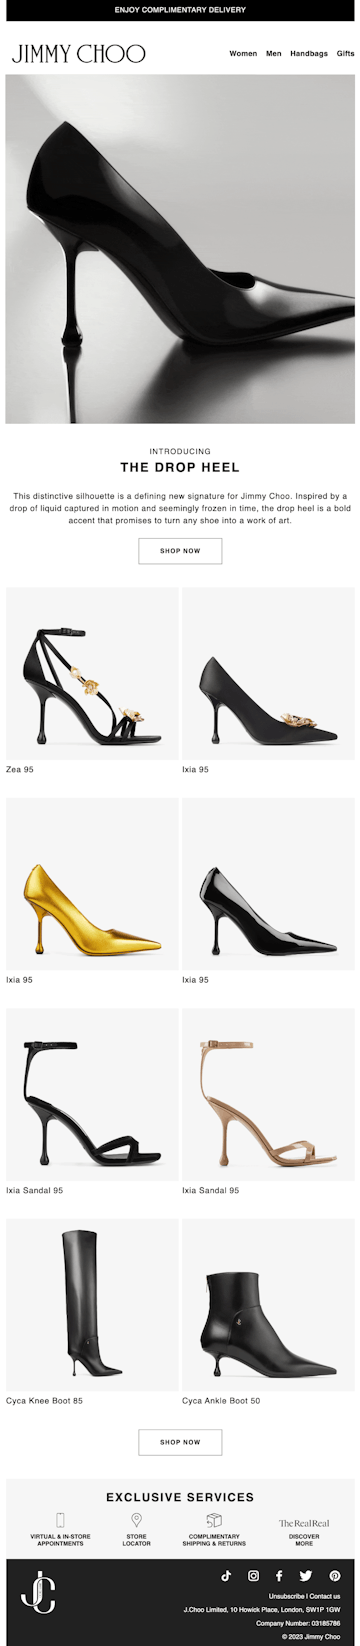 Jimmy Choo Email Design Thumbnail Preview